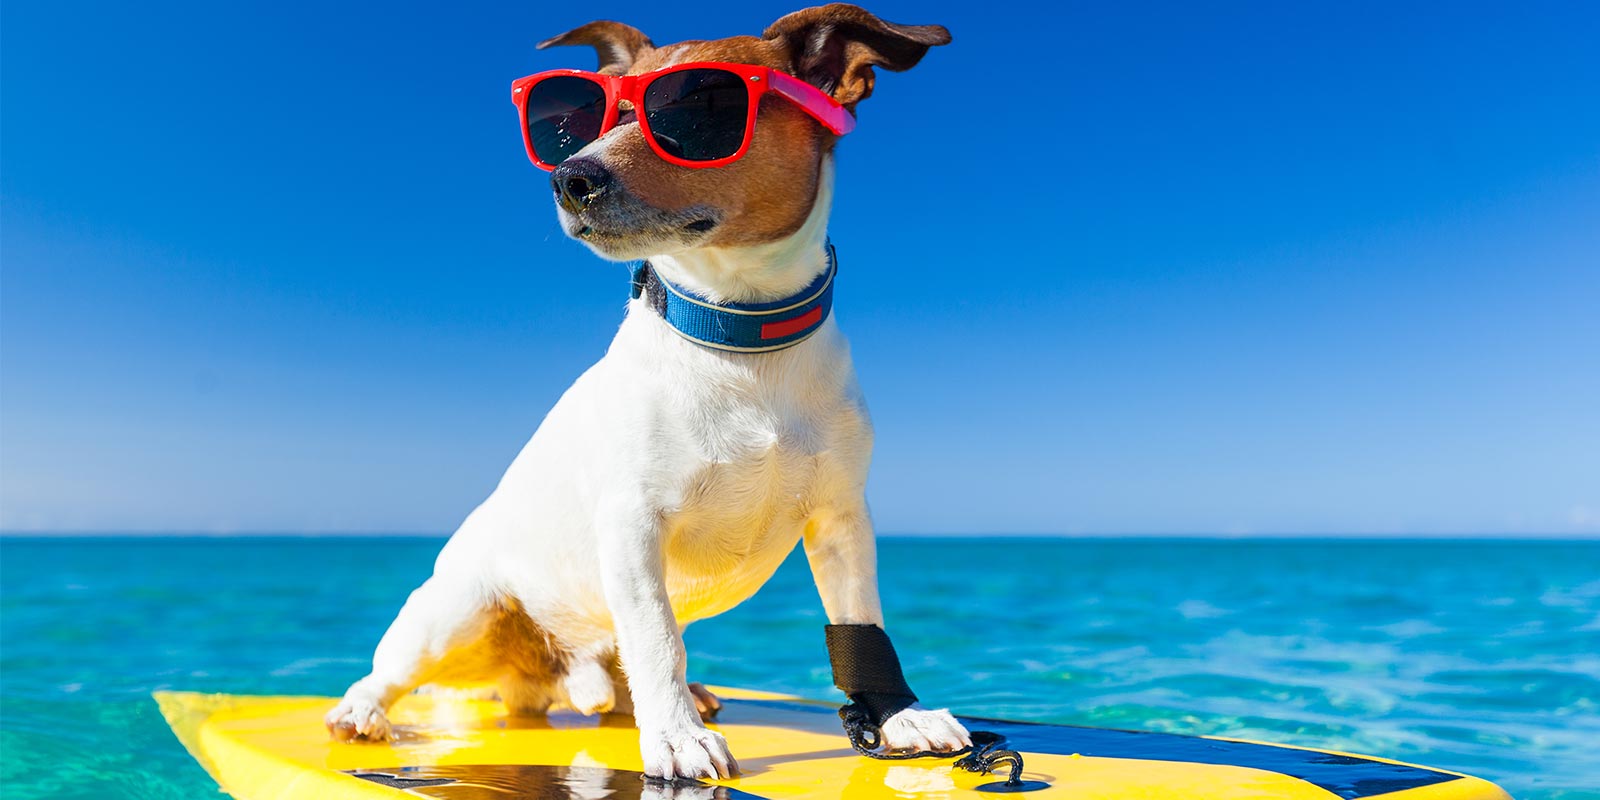 a pup on a surf board on the beach with sunglasses